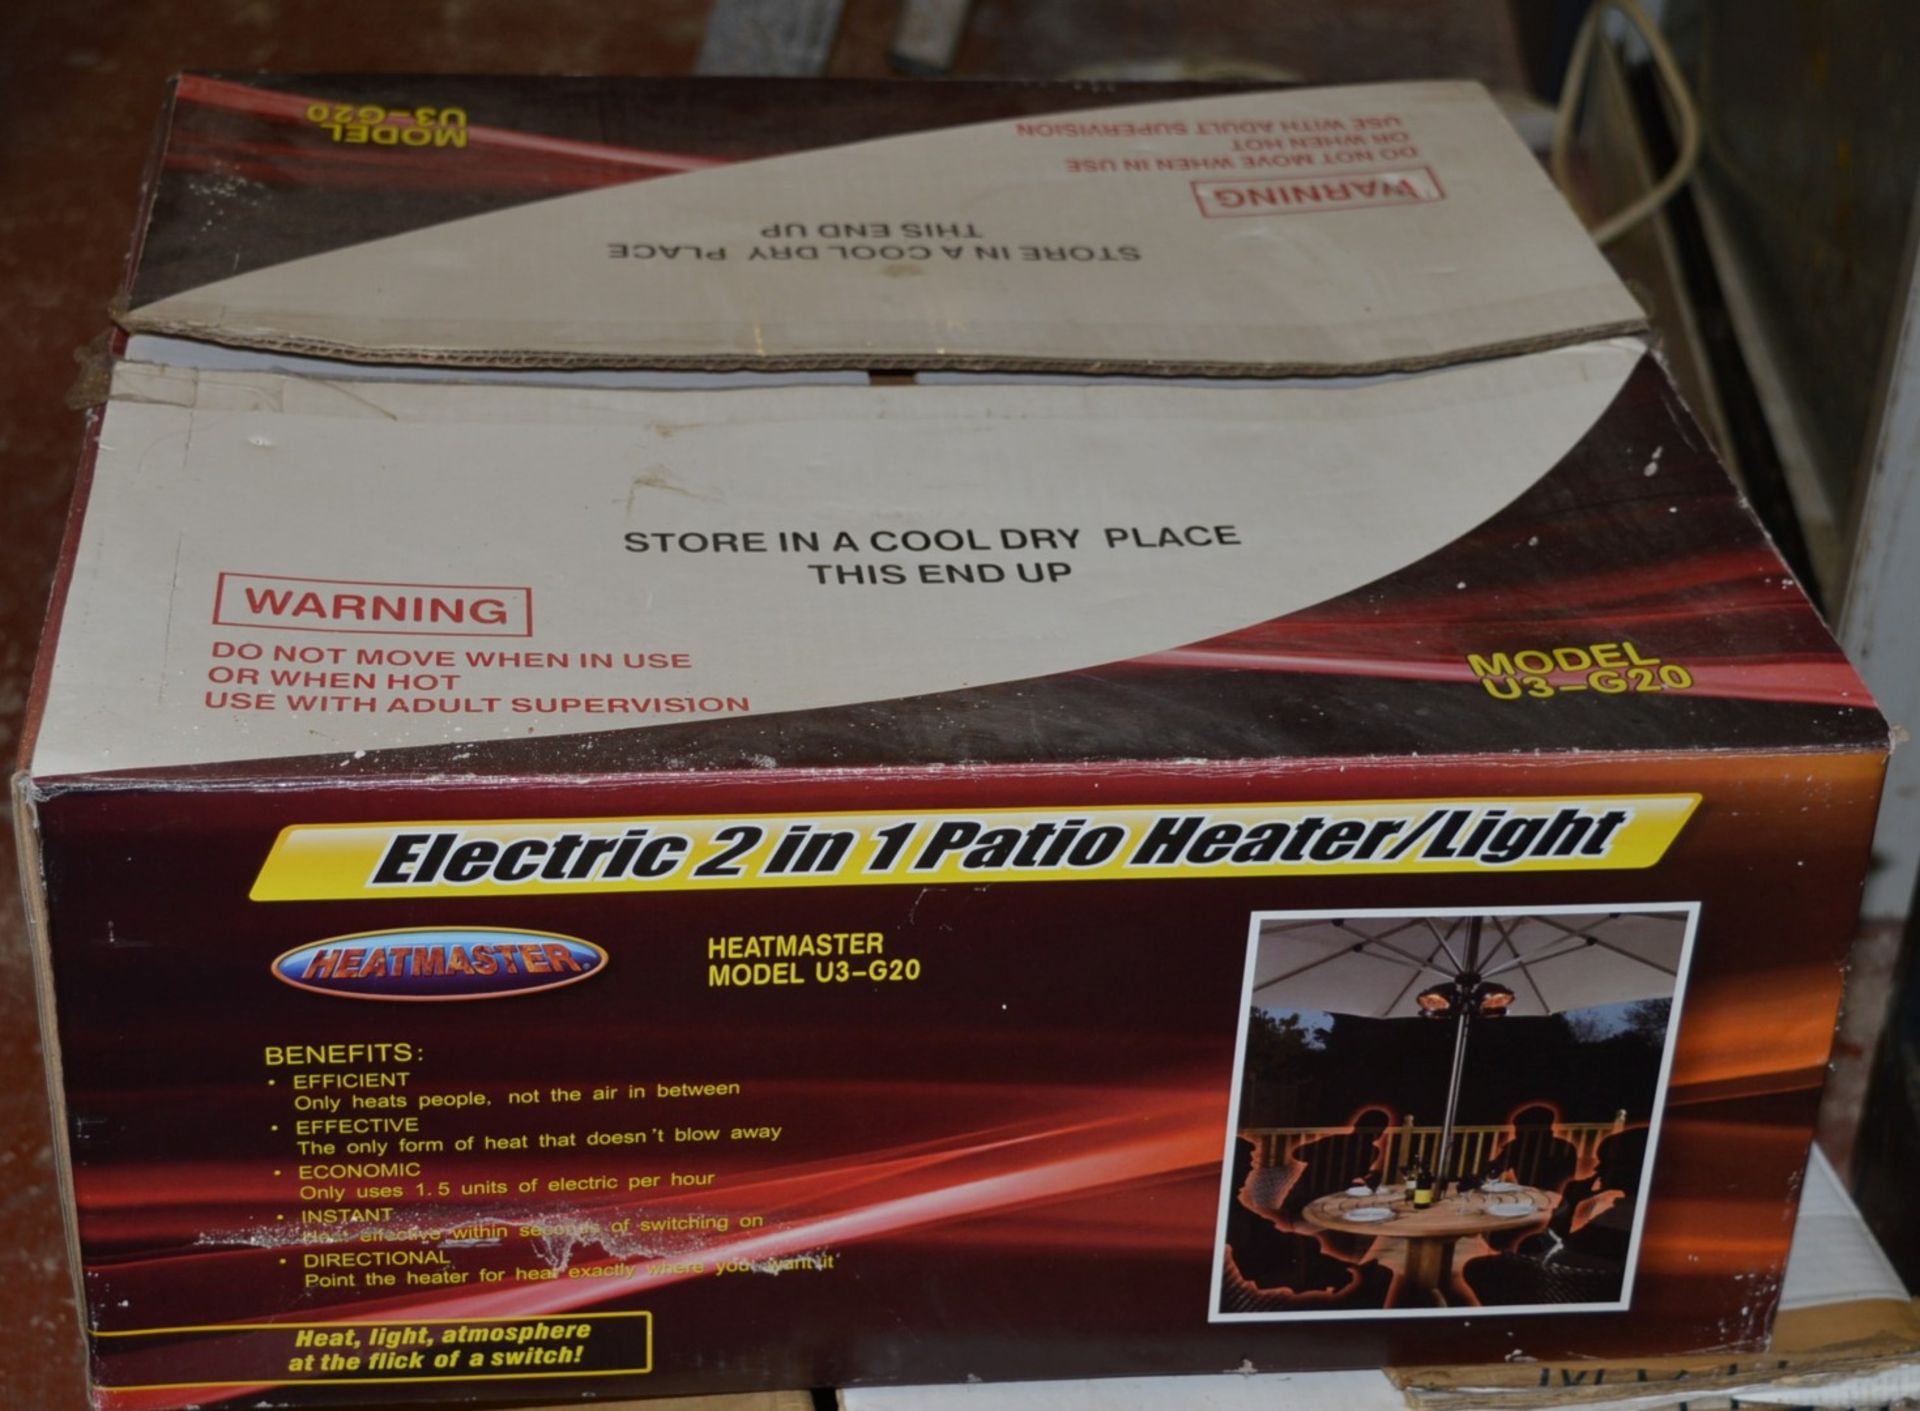 1 x Heatmaster Electric 2 in 1 Patio Heater Light - Model U3G20 - Boxed With Accessories - Ref: - Image 2 of 2